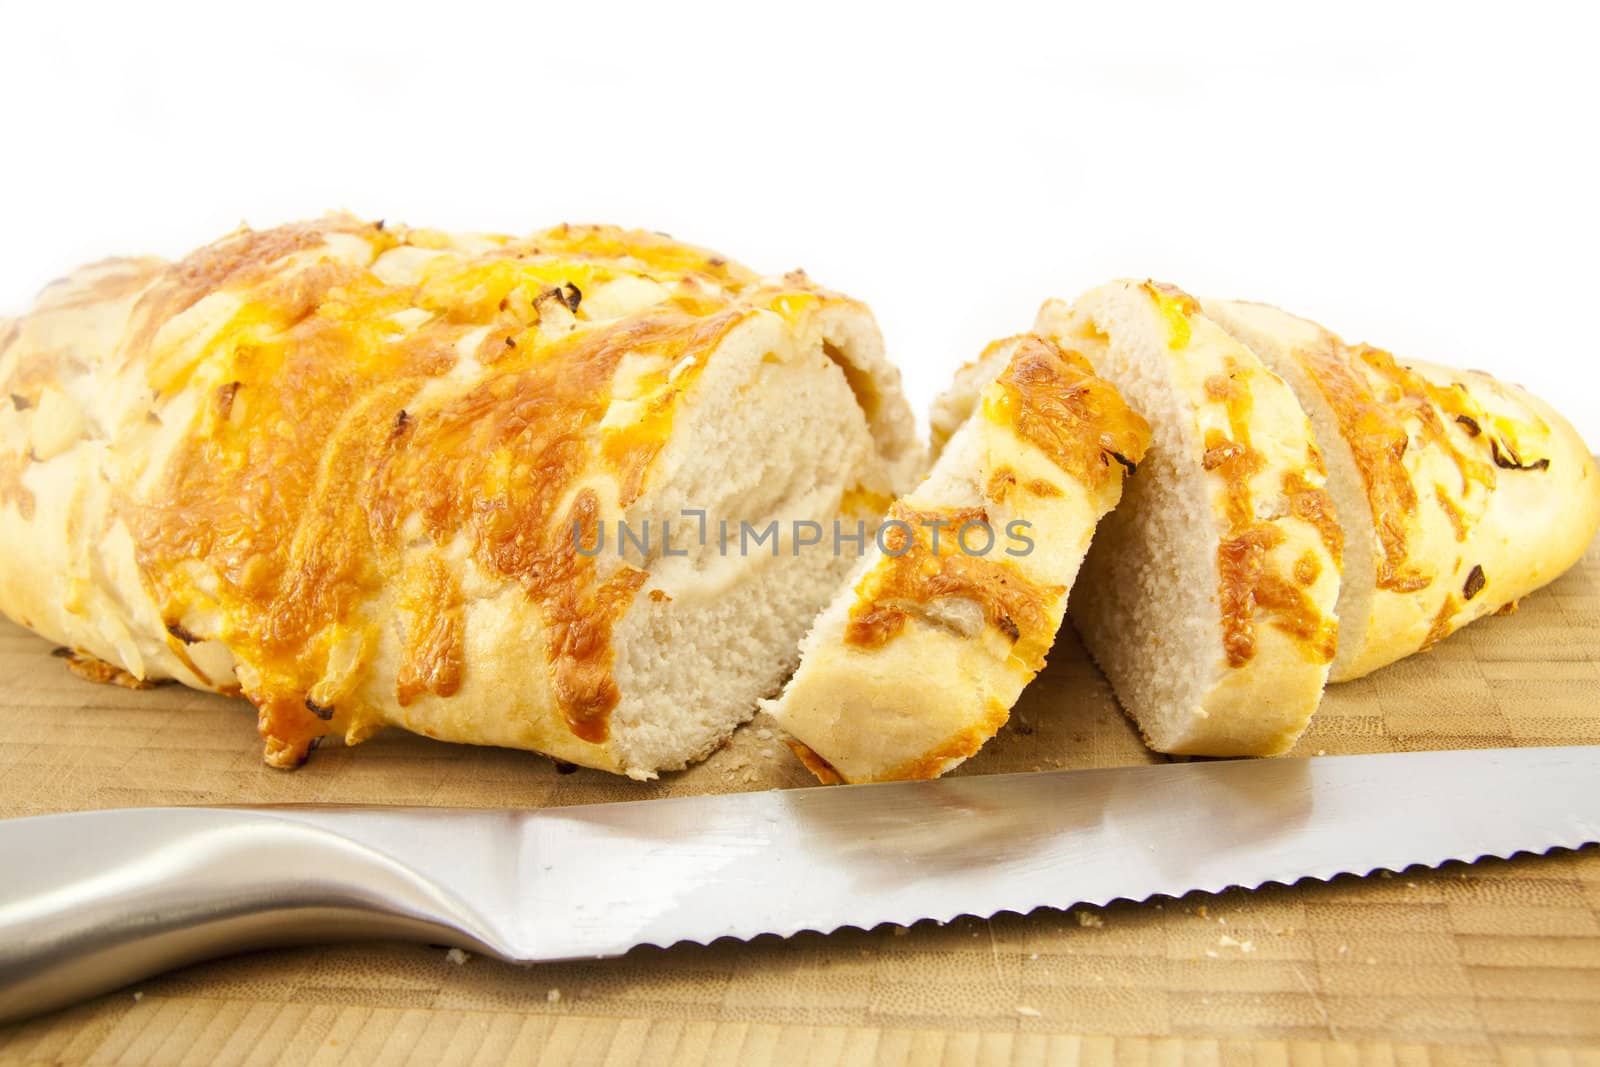 Cheese and Onion Bread on a wooden cutting board with a Knife